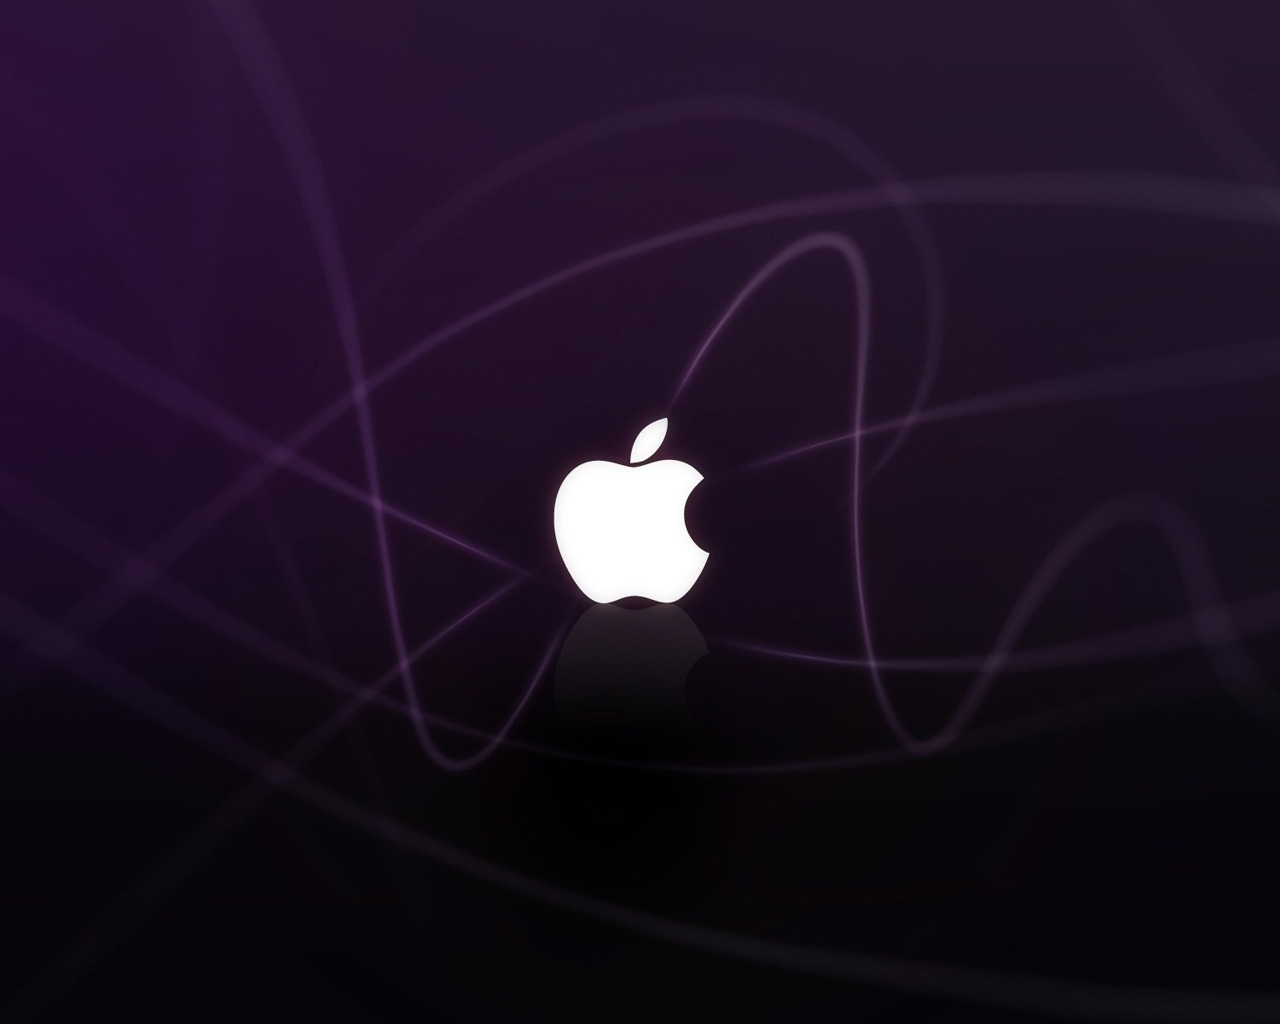 Purple Apple frequency for 1280 x 1024 resolution